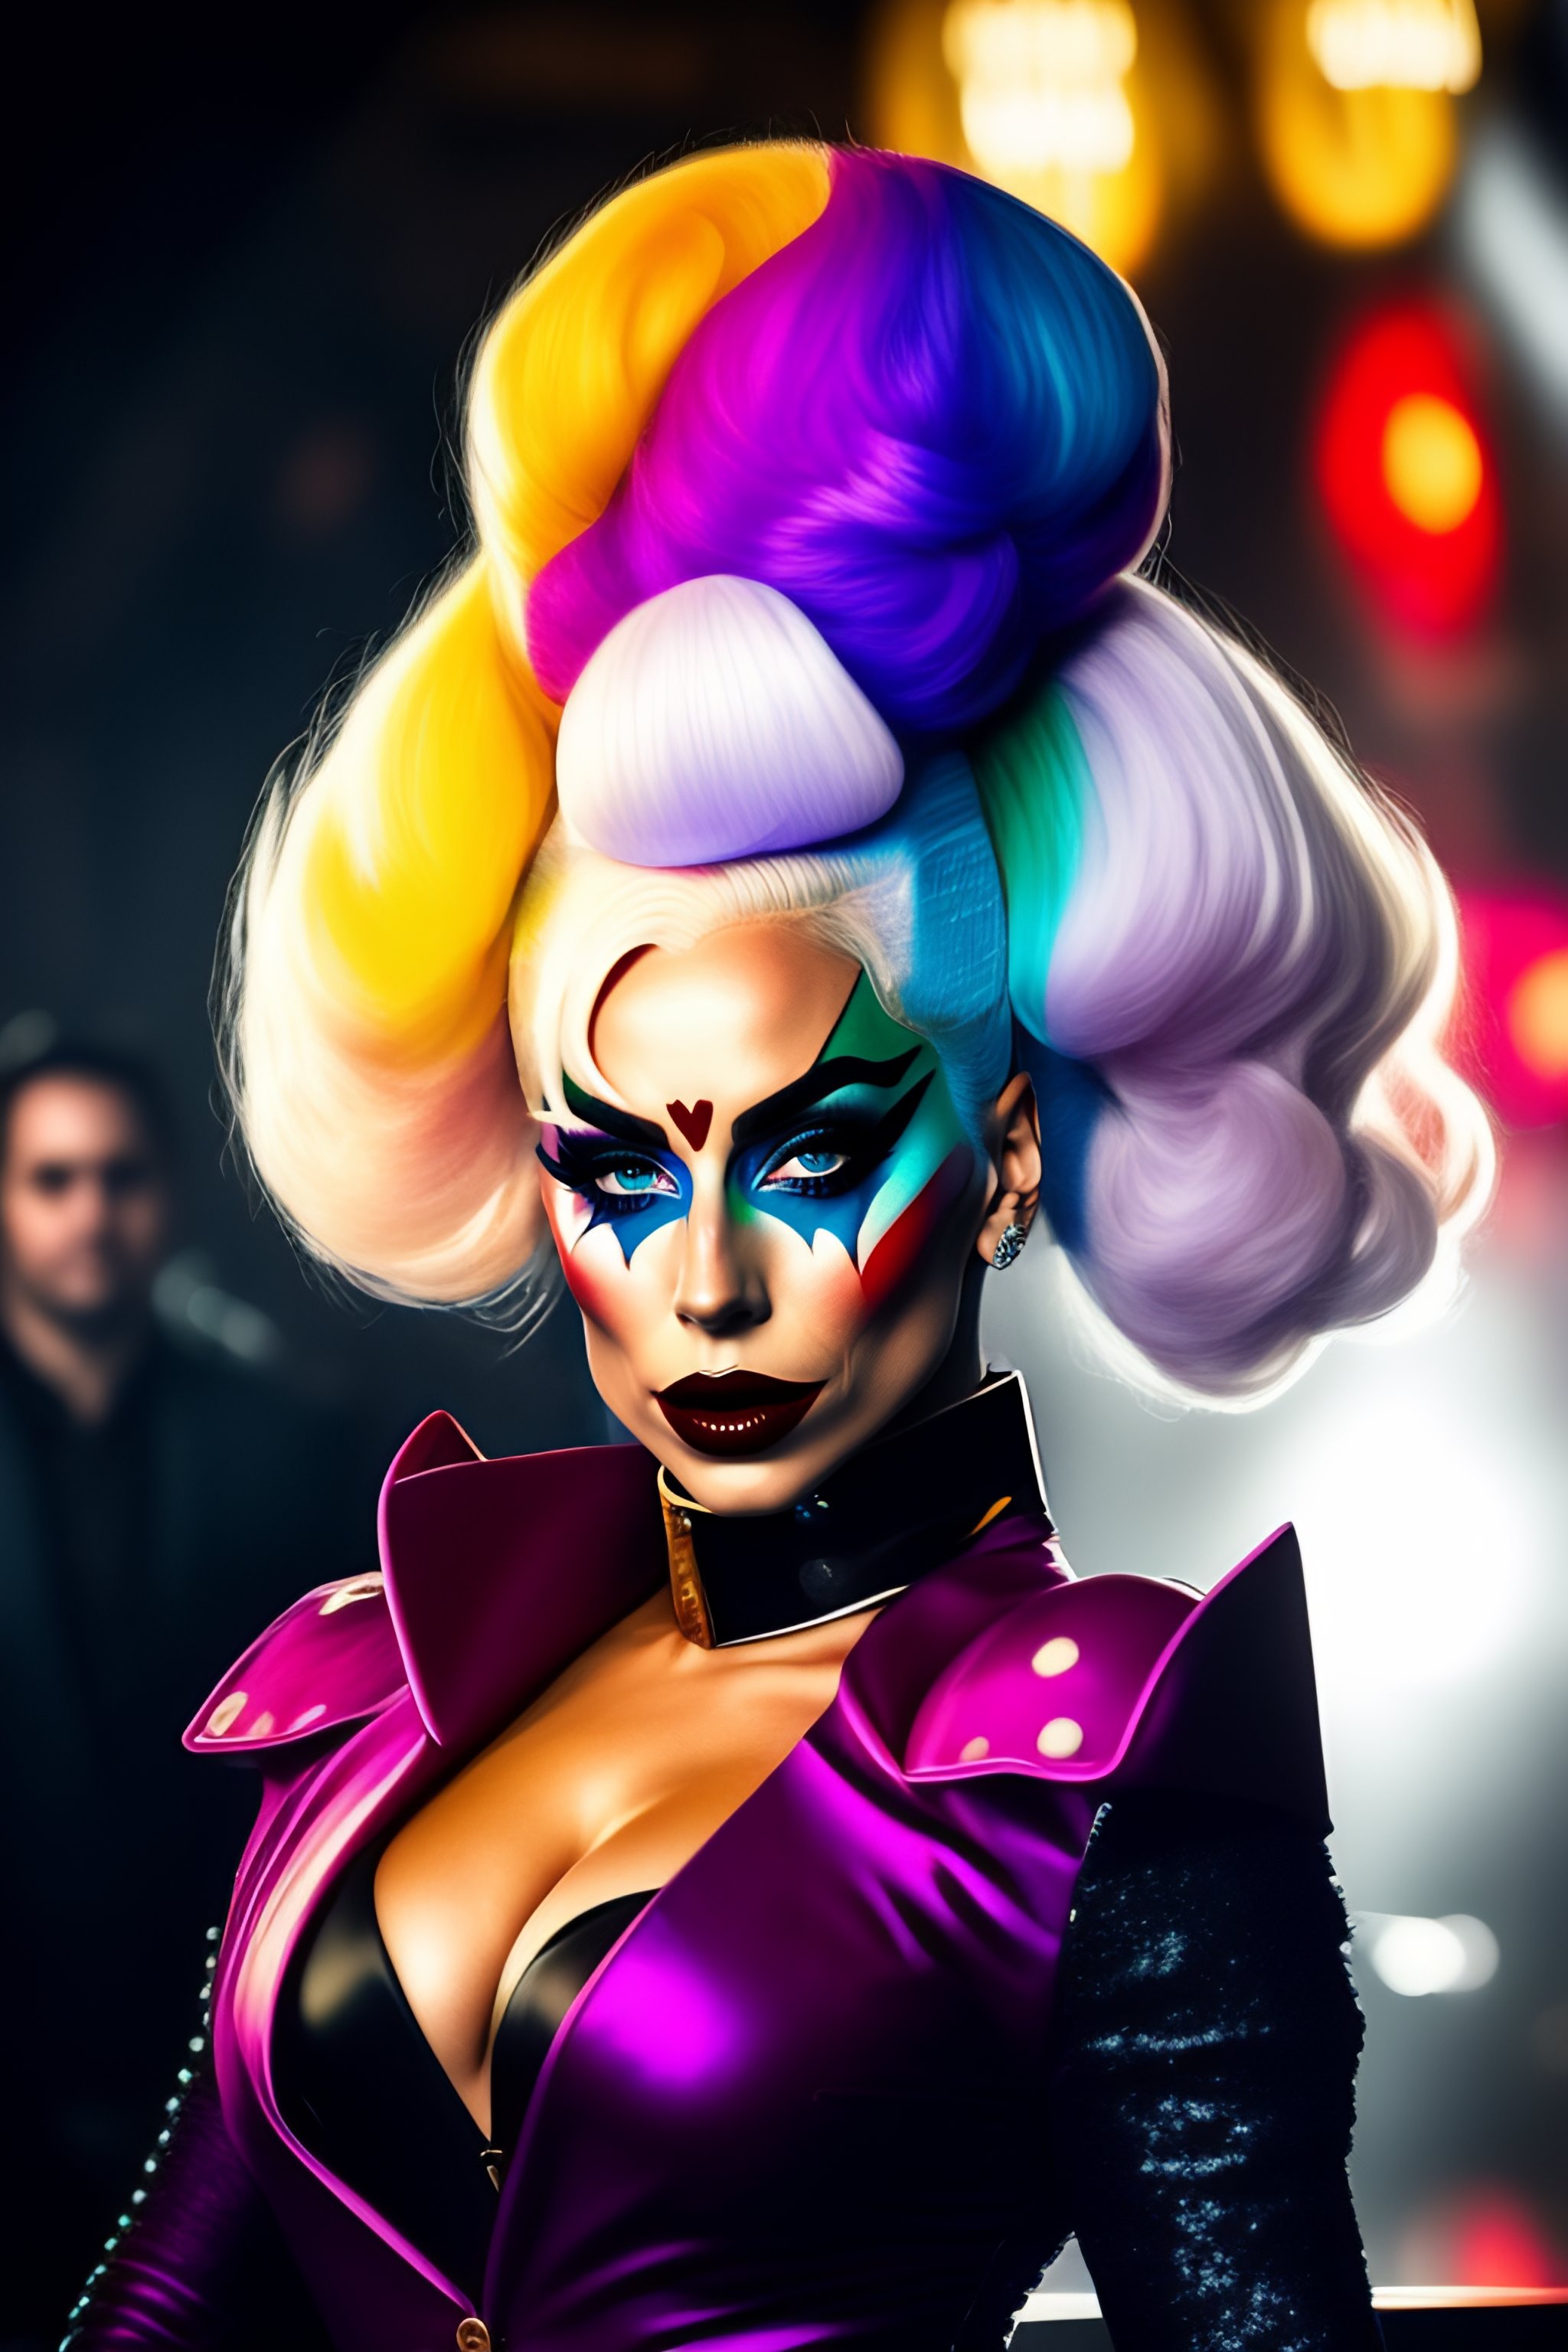 Lexica Lady Gaga In The Style Of Harley Quinn On The Set Of A Movie With Joaquim Phenix As The